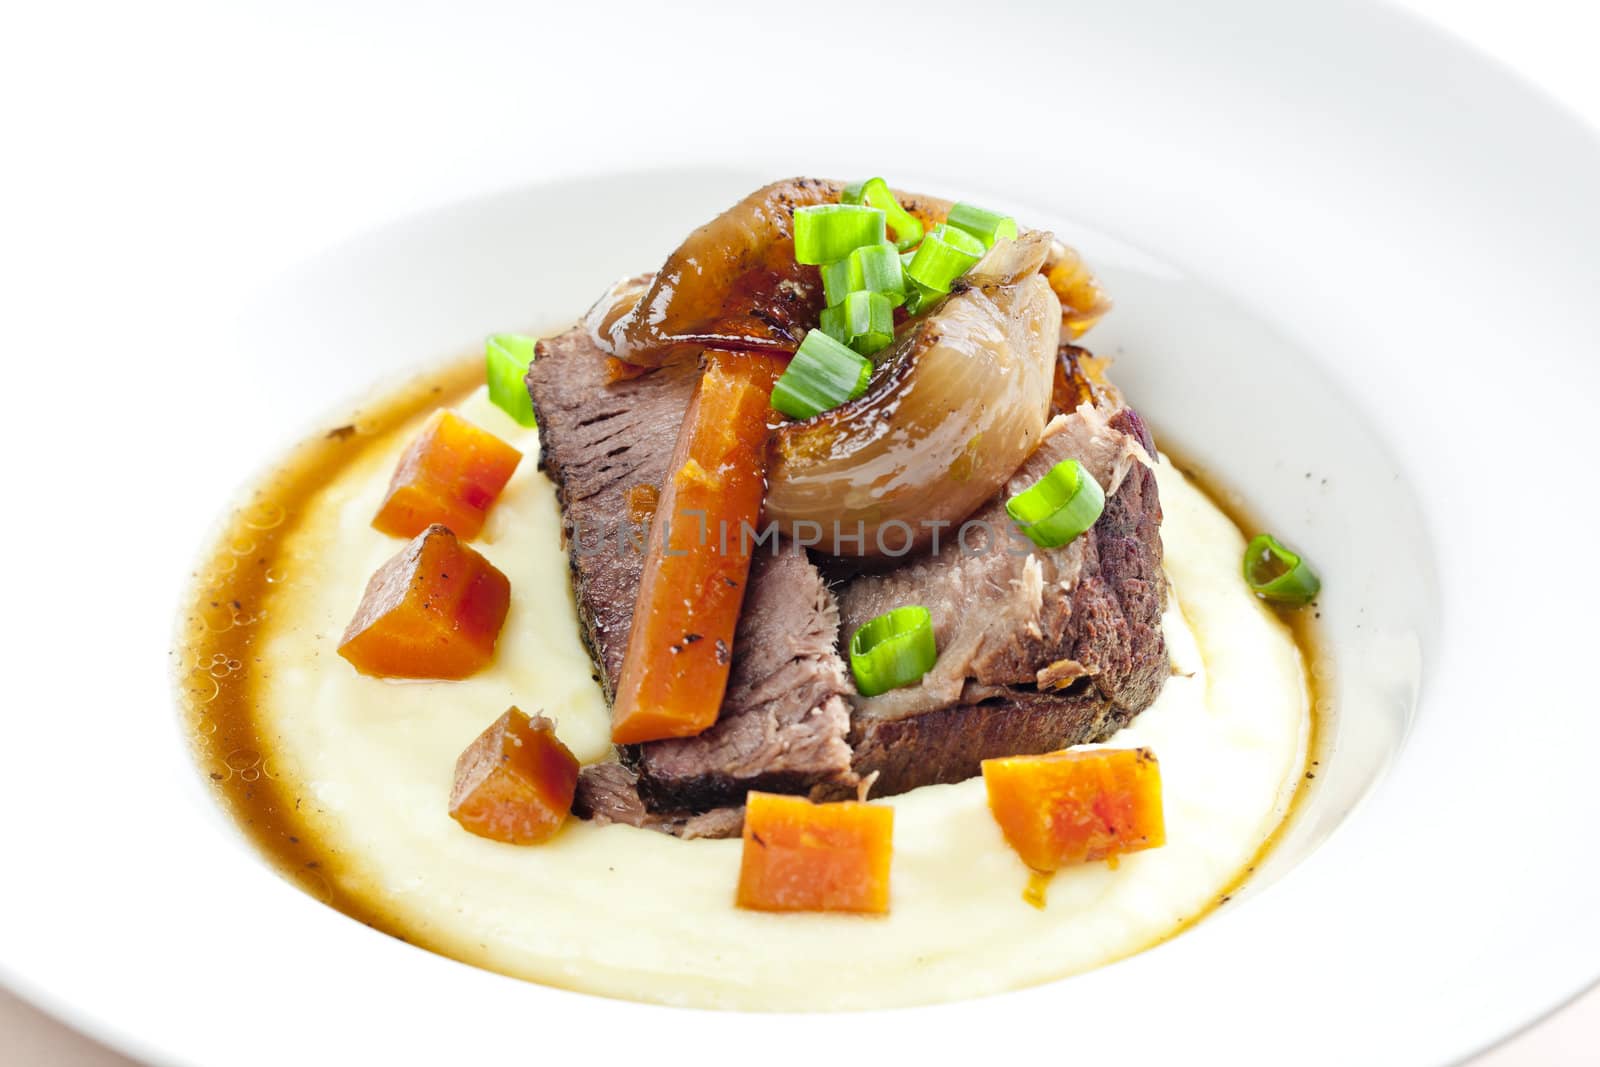 beef stew with carrot and mashed potatoes by phbcz